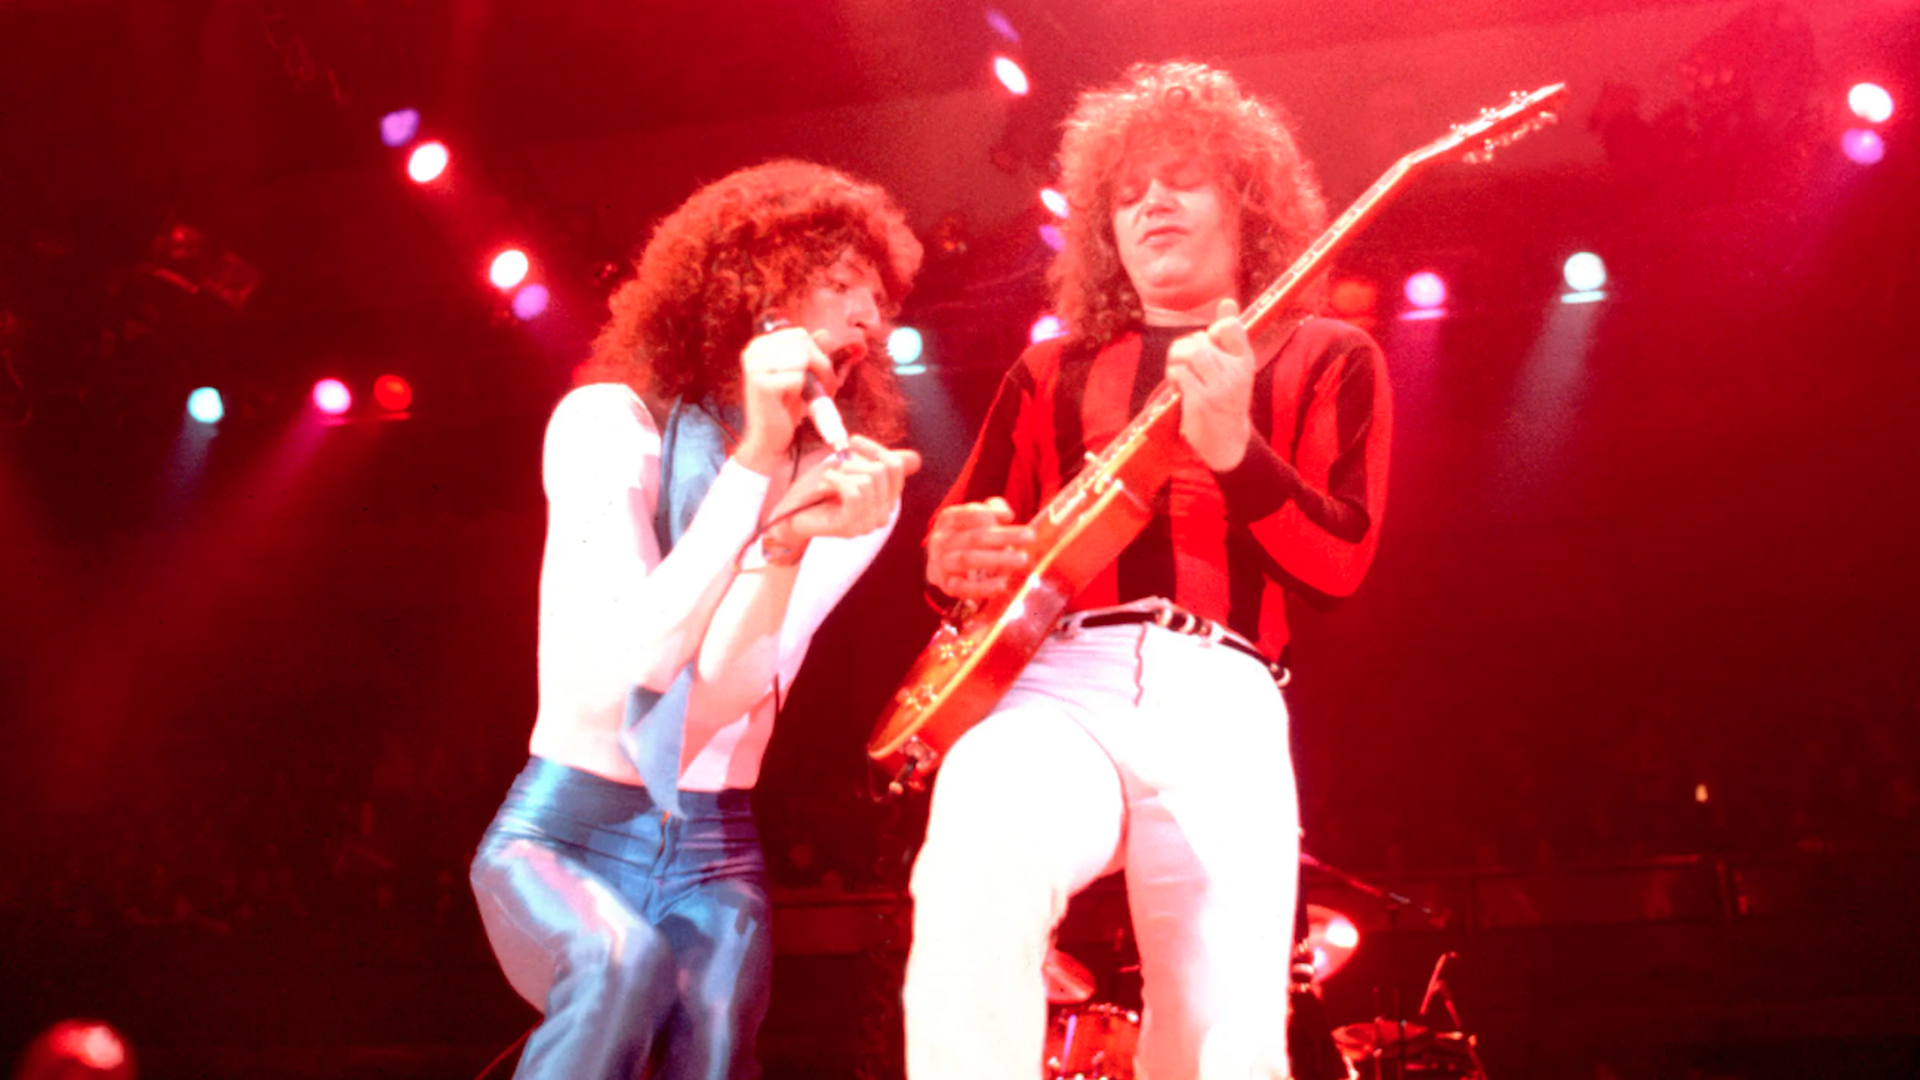 Photo of two rock stars on stage performing 